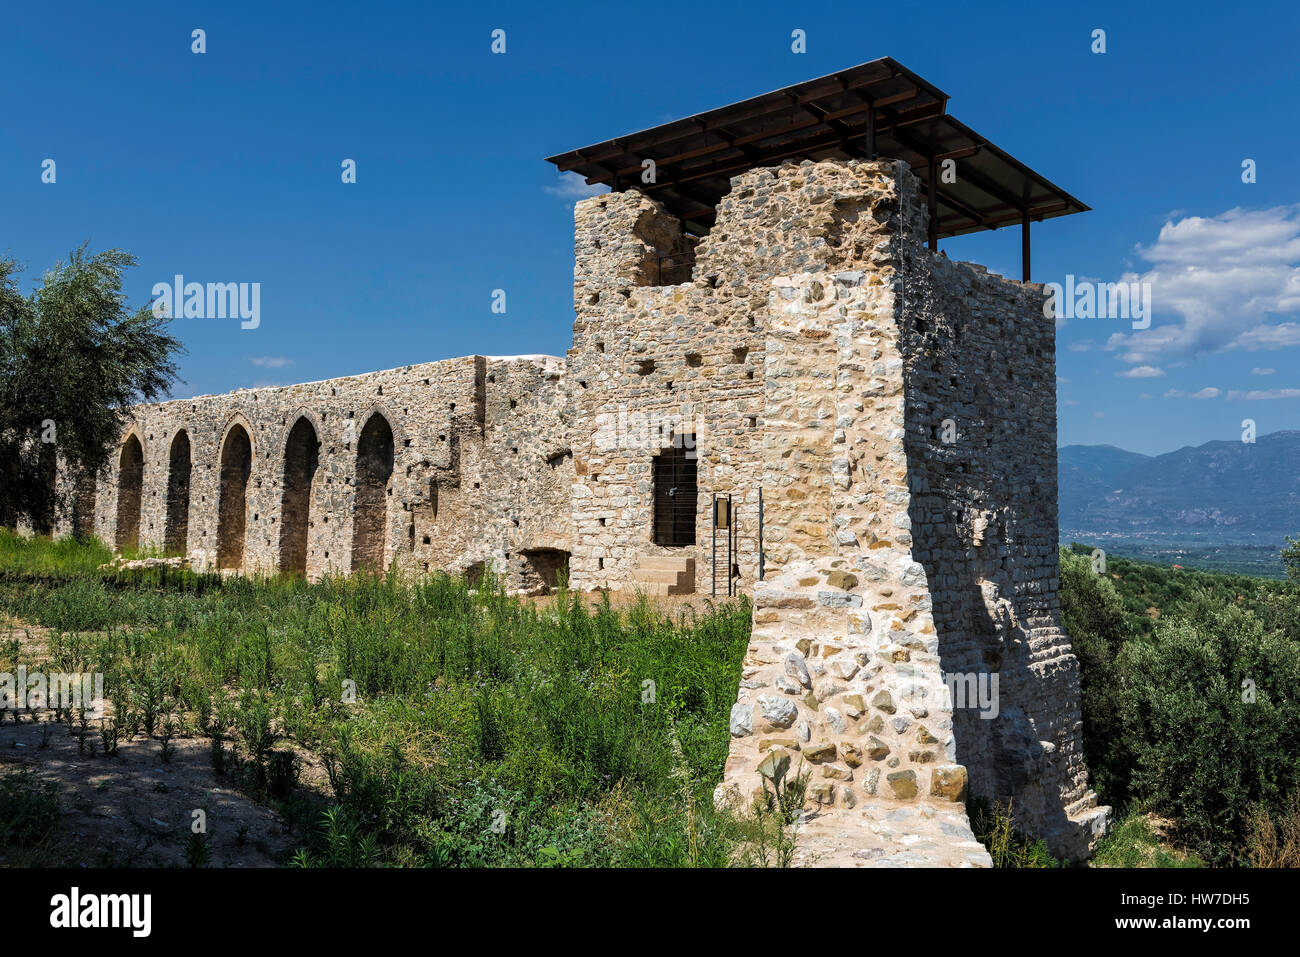 View of the castle of Androussa in Peloponnese, Greece Stock Photo